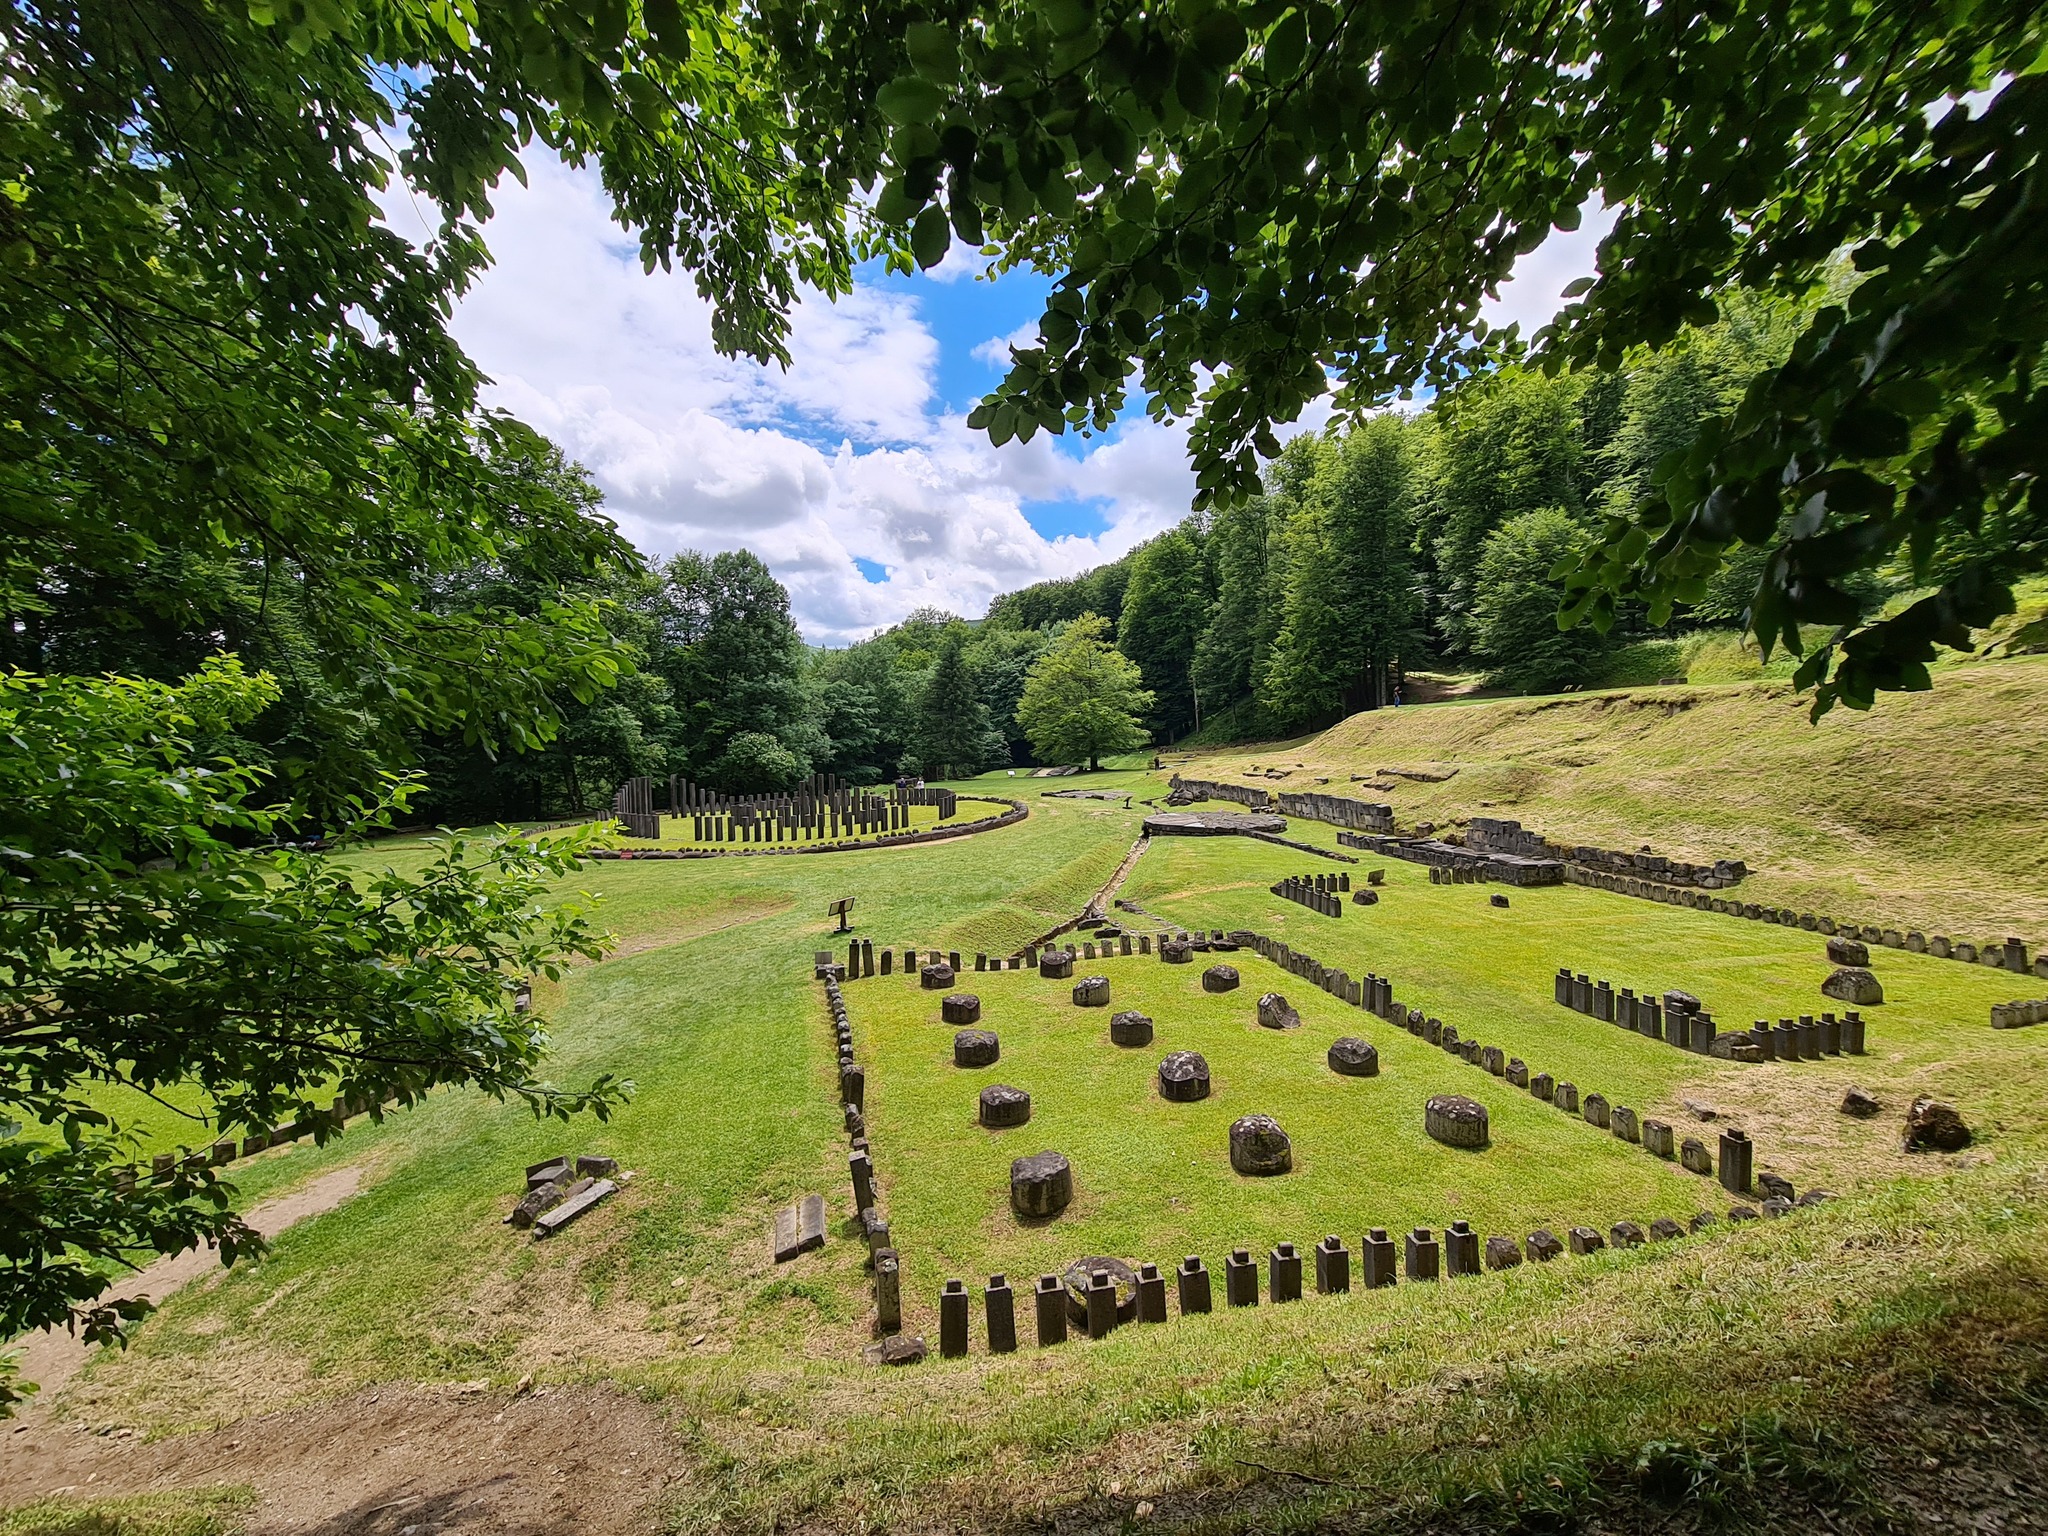 Sarmizegetusa Regia, the capital and the most important military, religious and political center of the Dacians before the wars with the Roman Empire